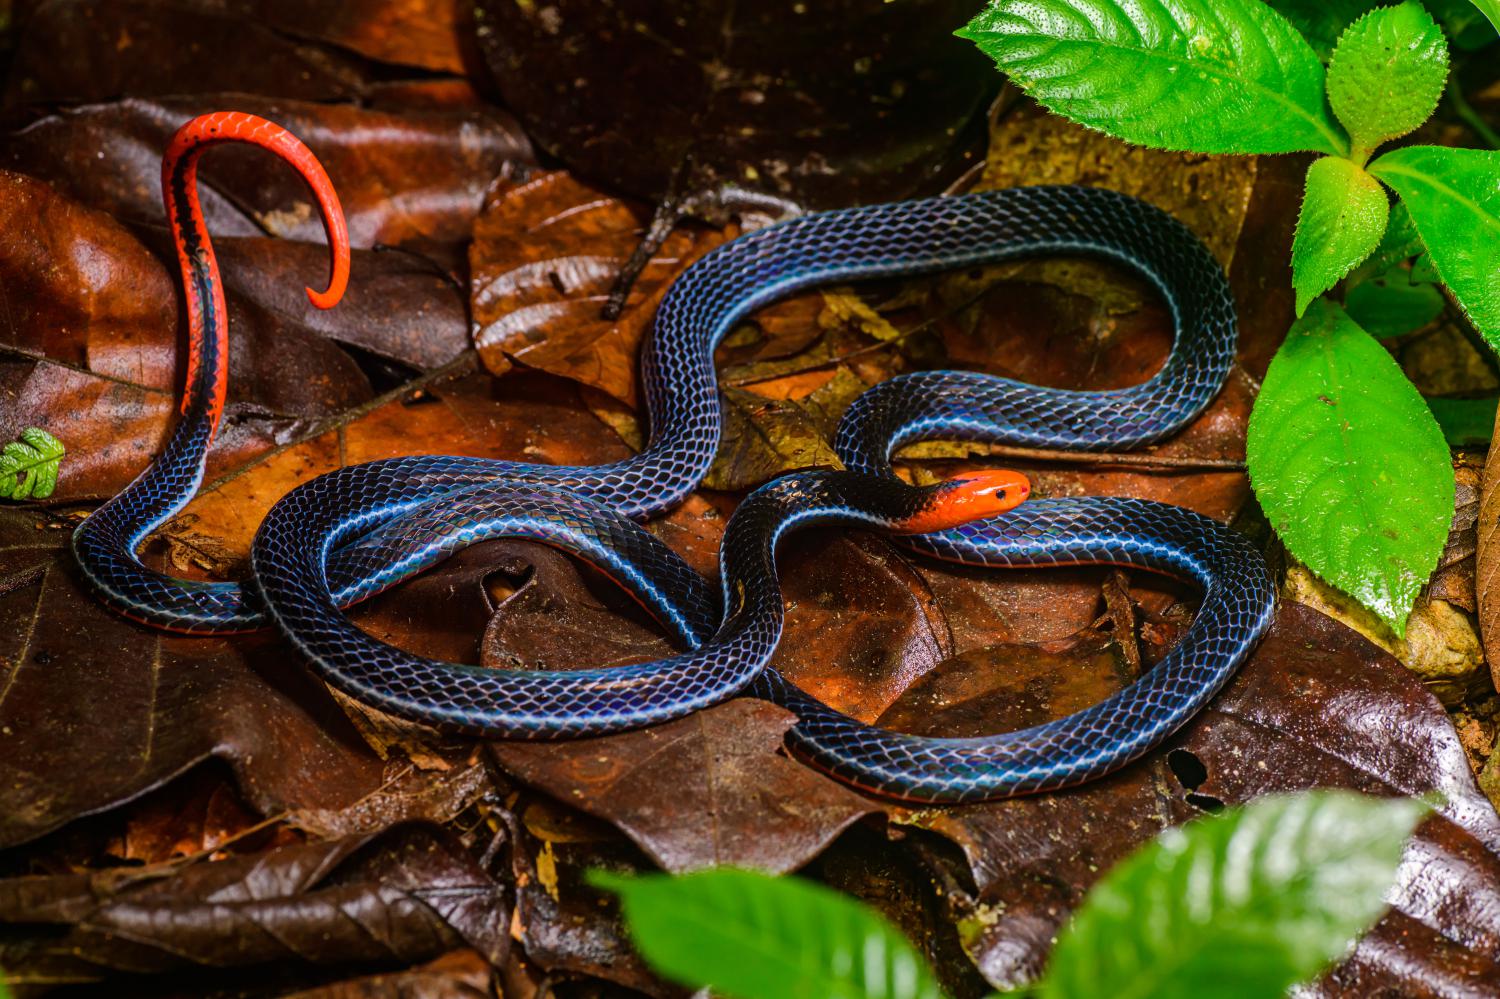 19-intriguing-facts-about-malayan-blue-coral-snake